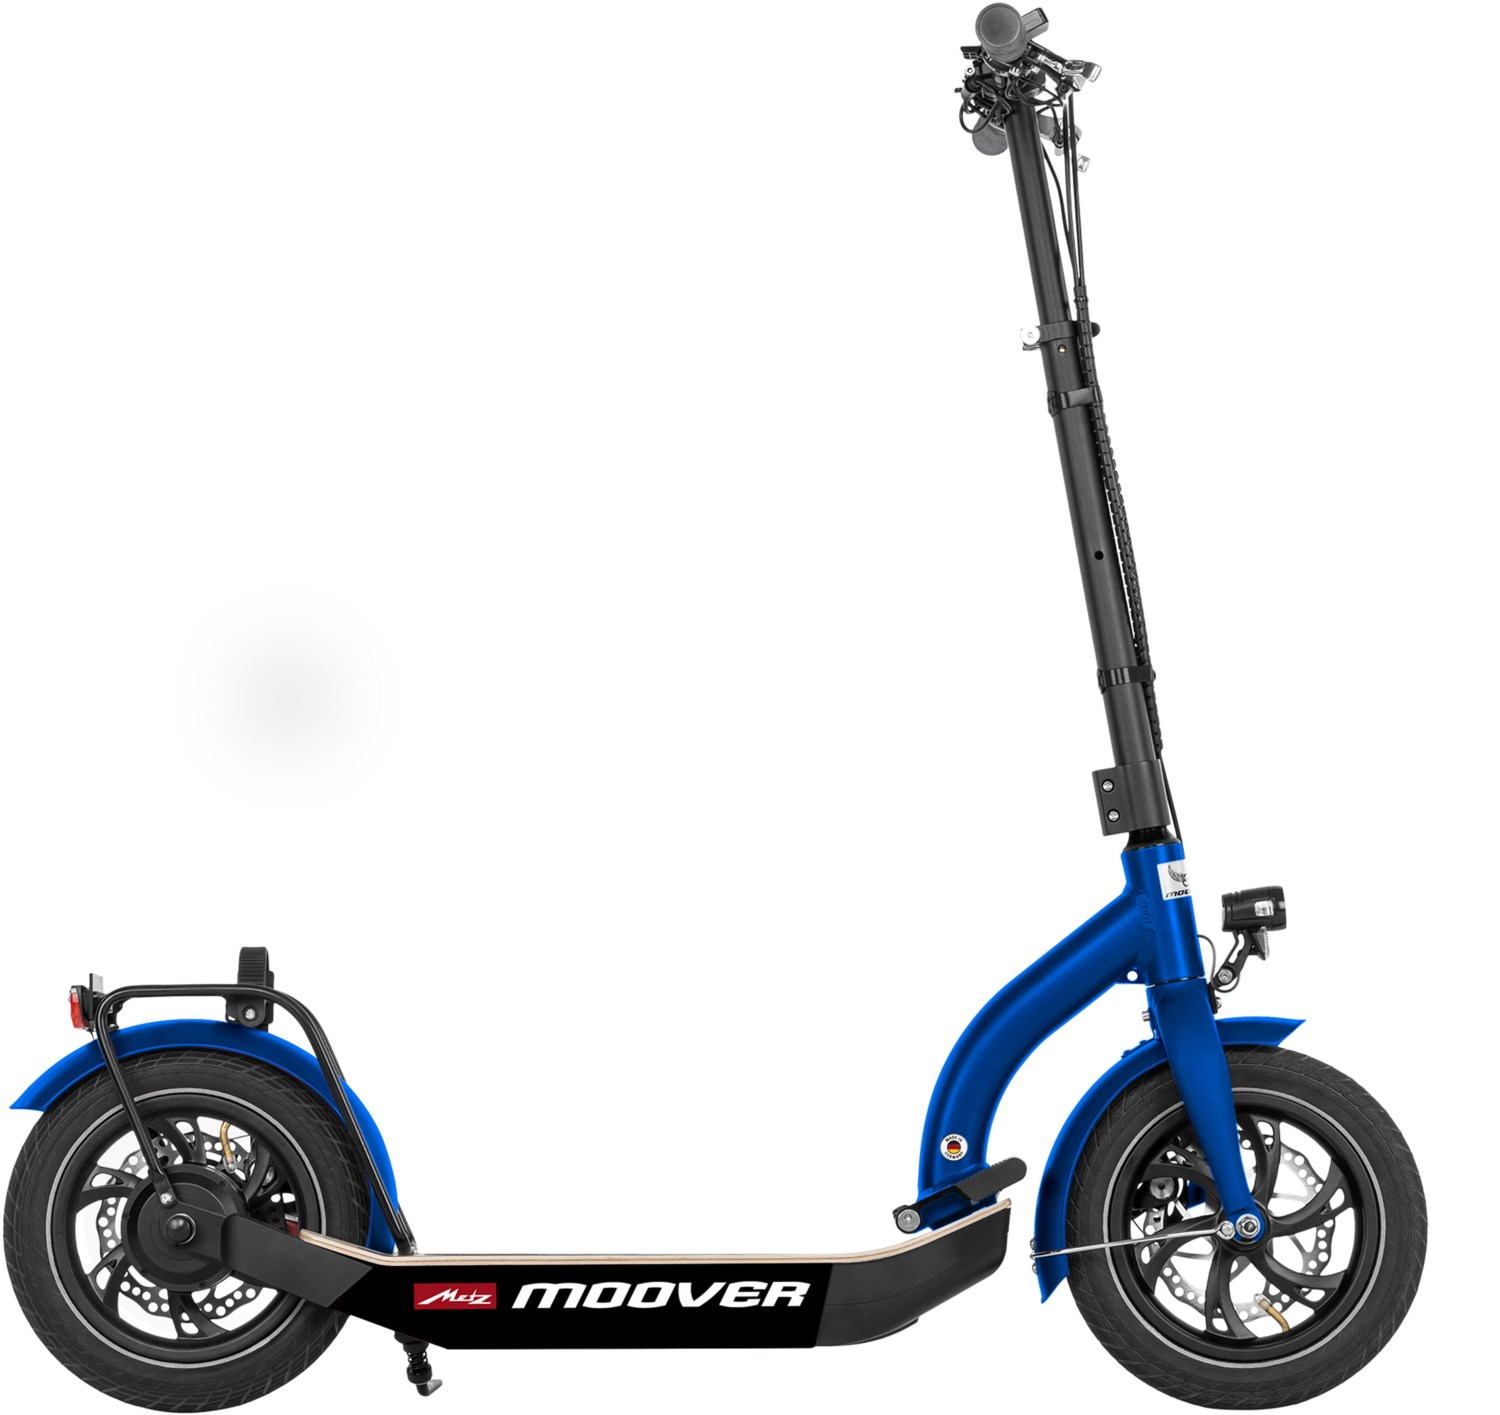 Metz Moover (Euronics Special Edition) Roller